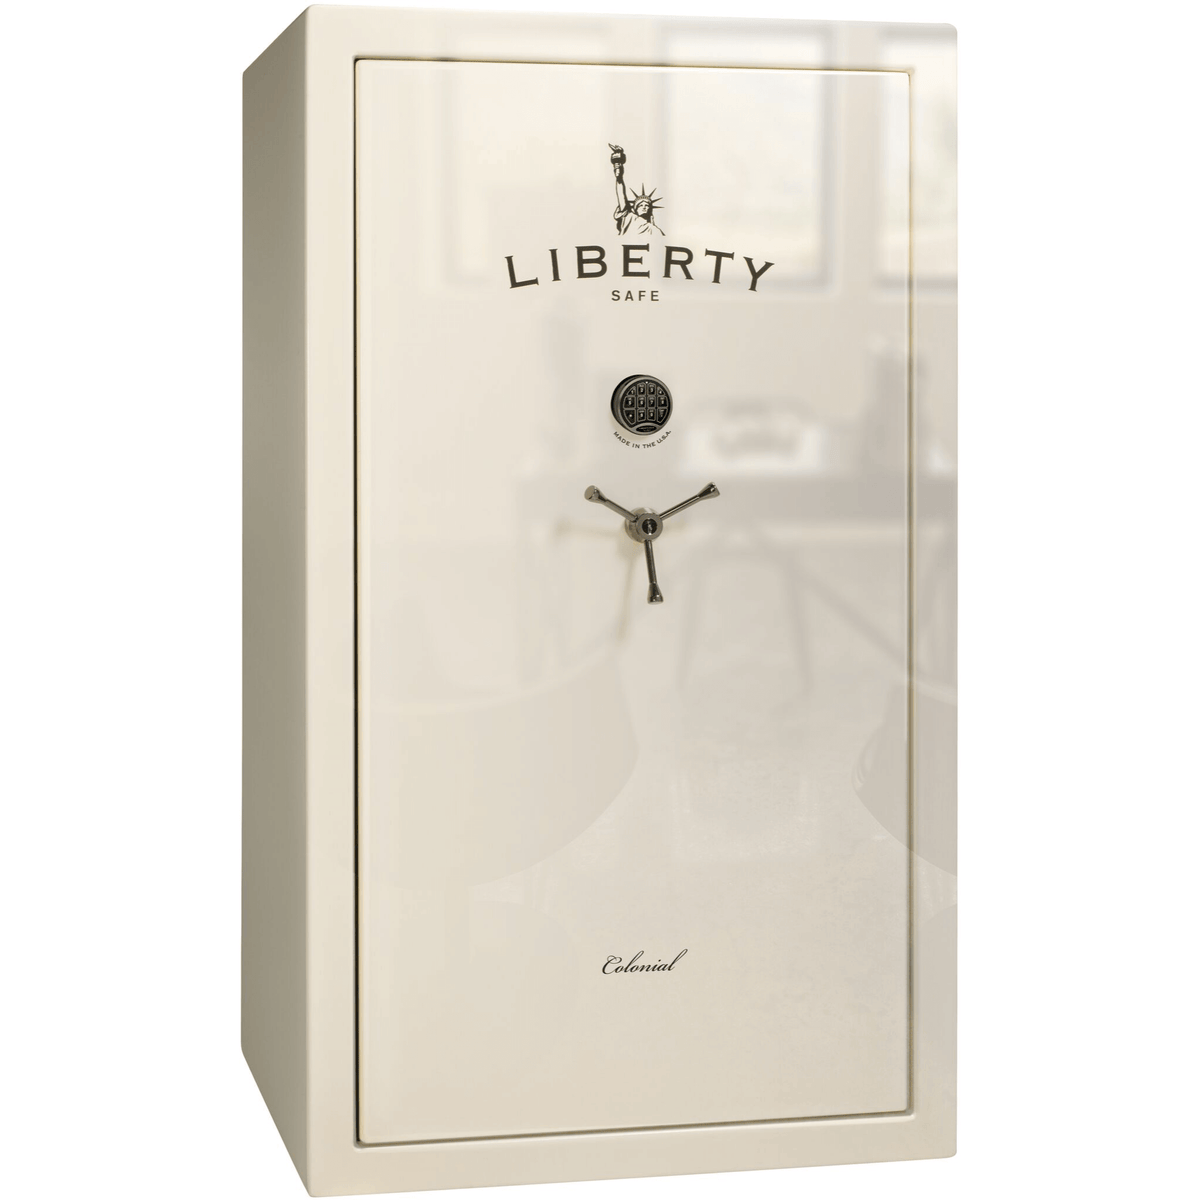 Liberty Colonial 50 Safe in White Gloss with Black Chrome Electronic Lock.